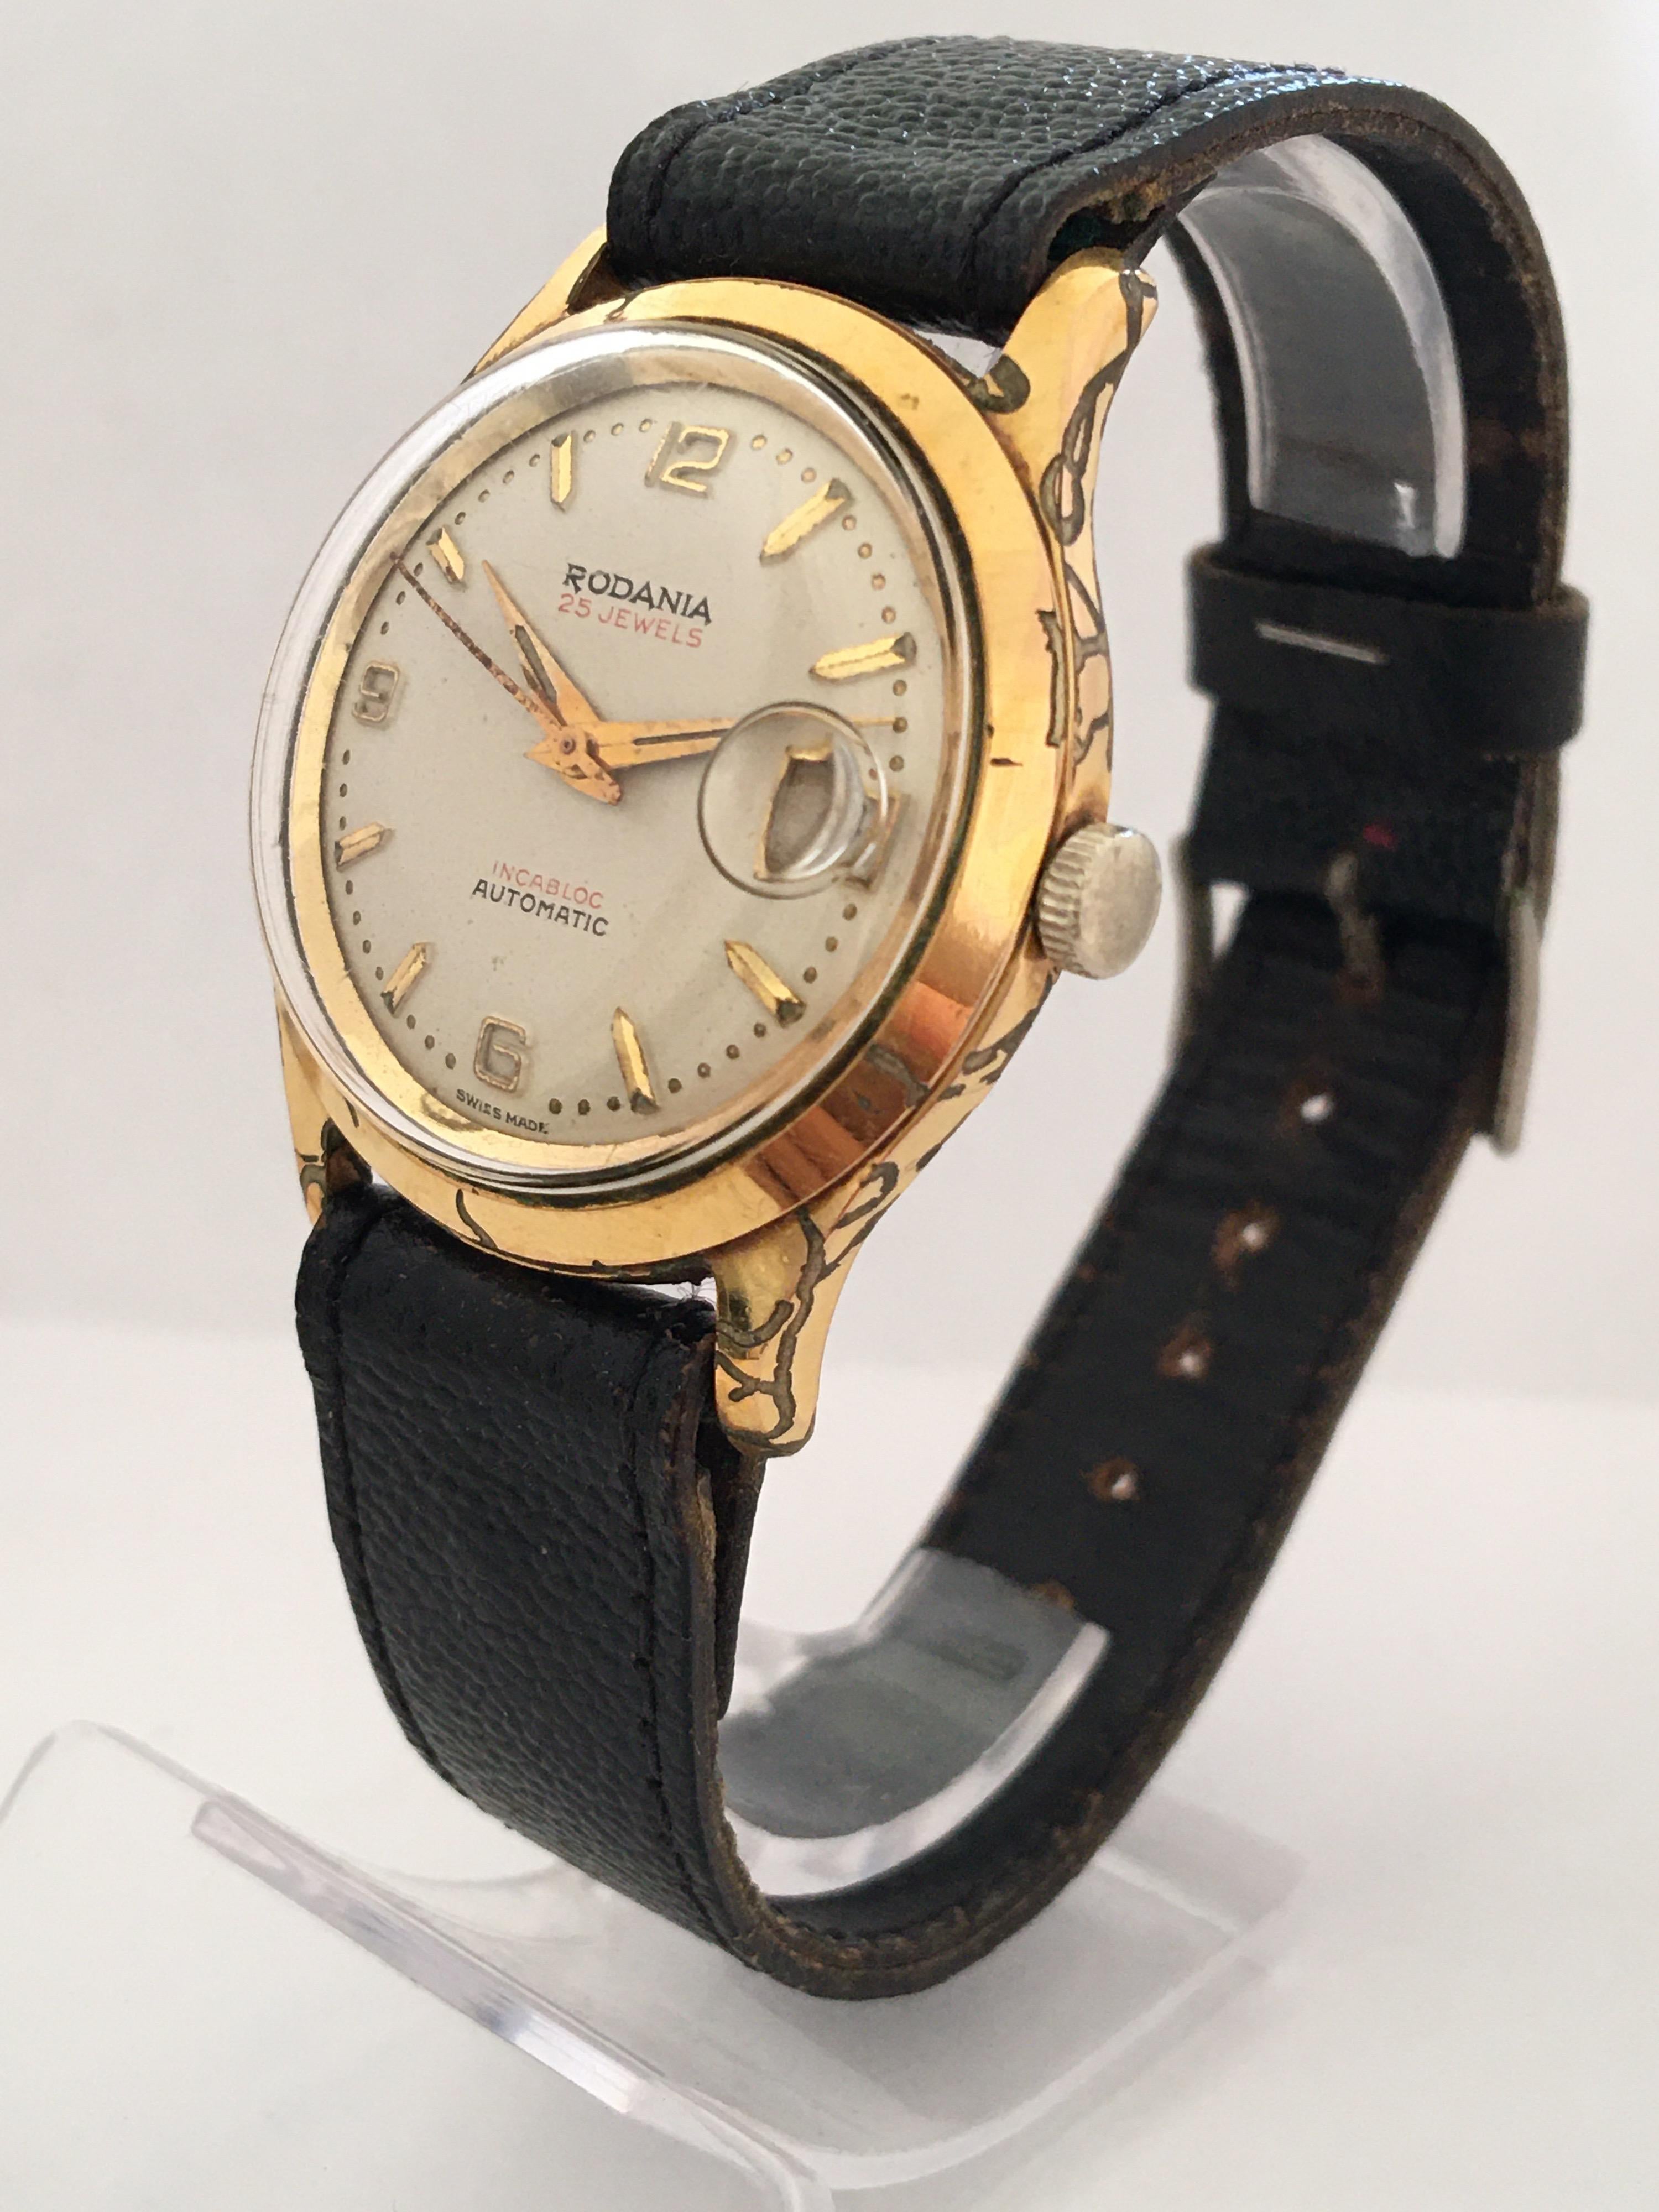 This beautiful Pre-owned vintage watch is in good working condition and is running well. Visible signs of wearing with some scratches and tarnished on the watch case and Bessel. The strap is slightly worn with its gold plated tarnished buckle as